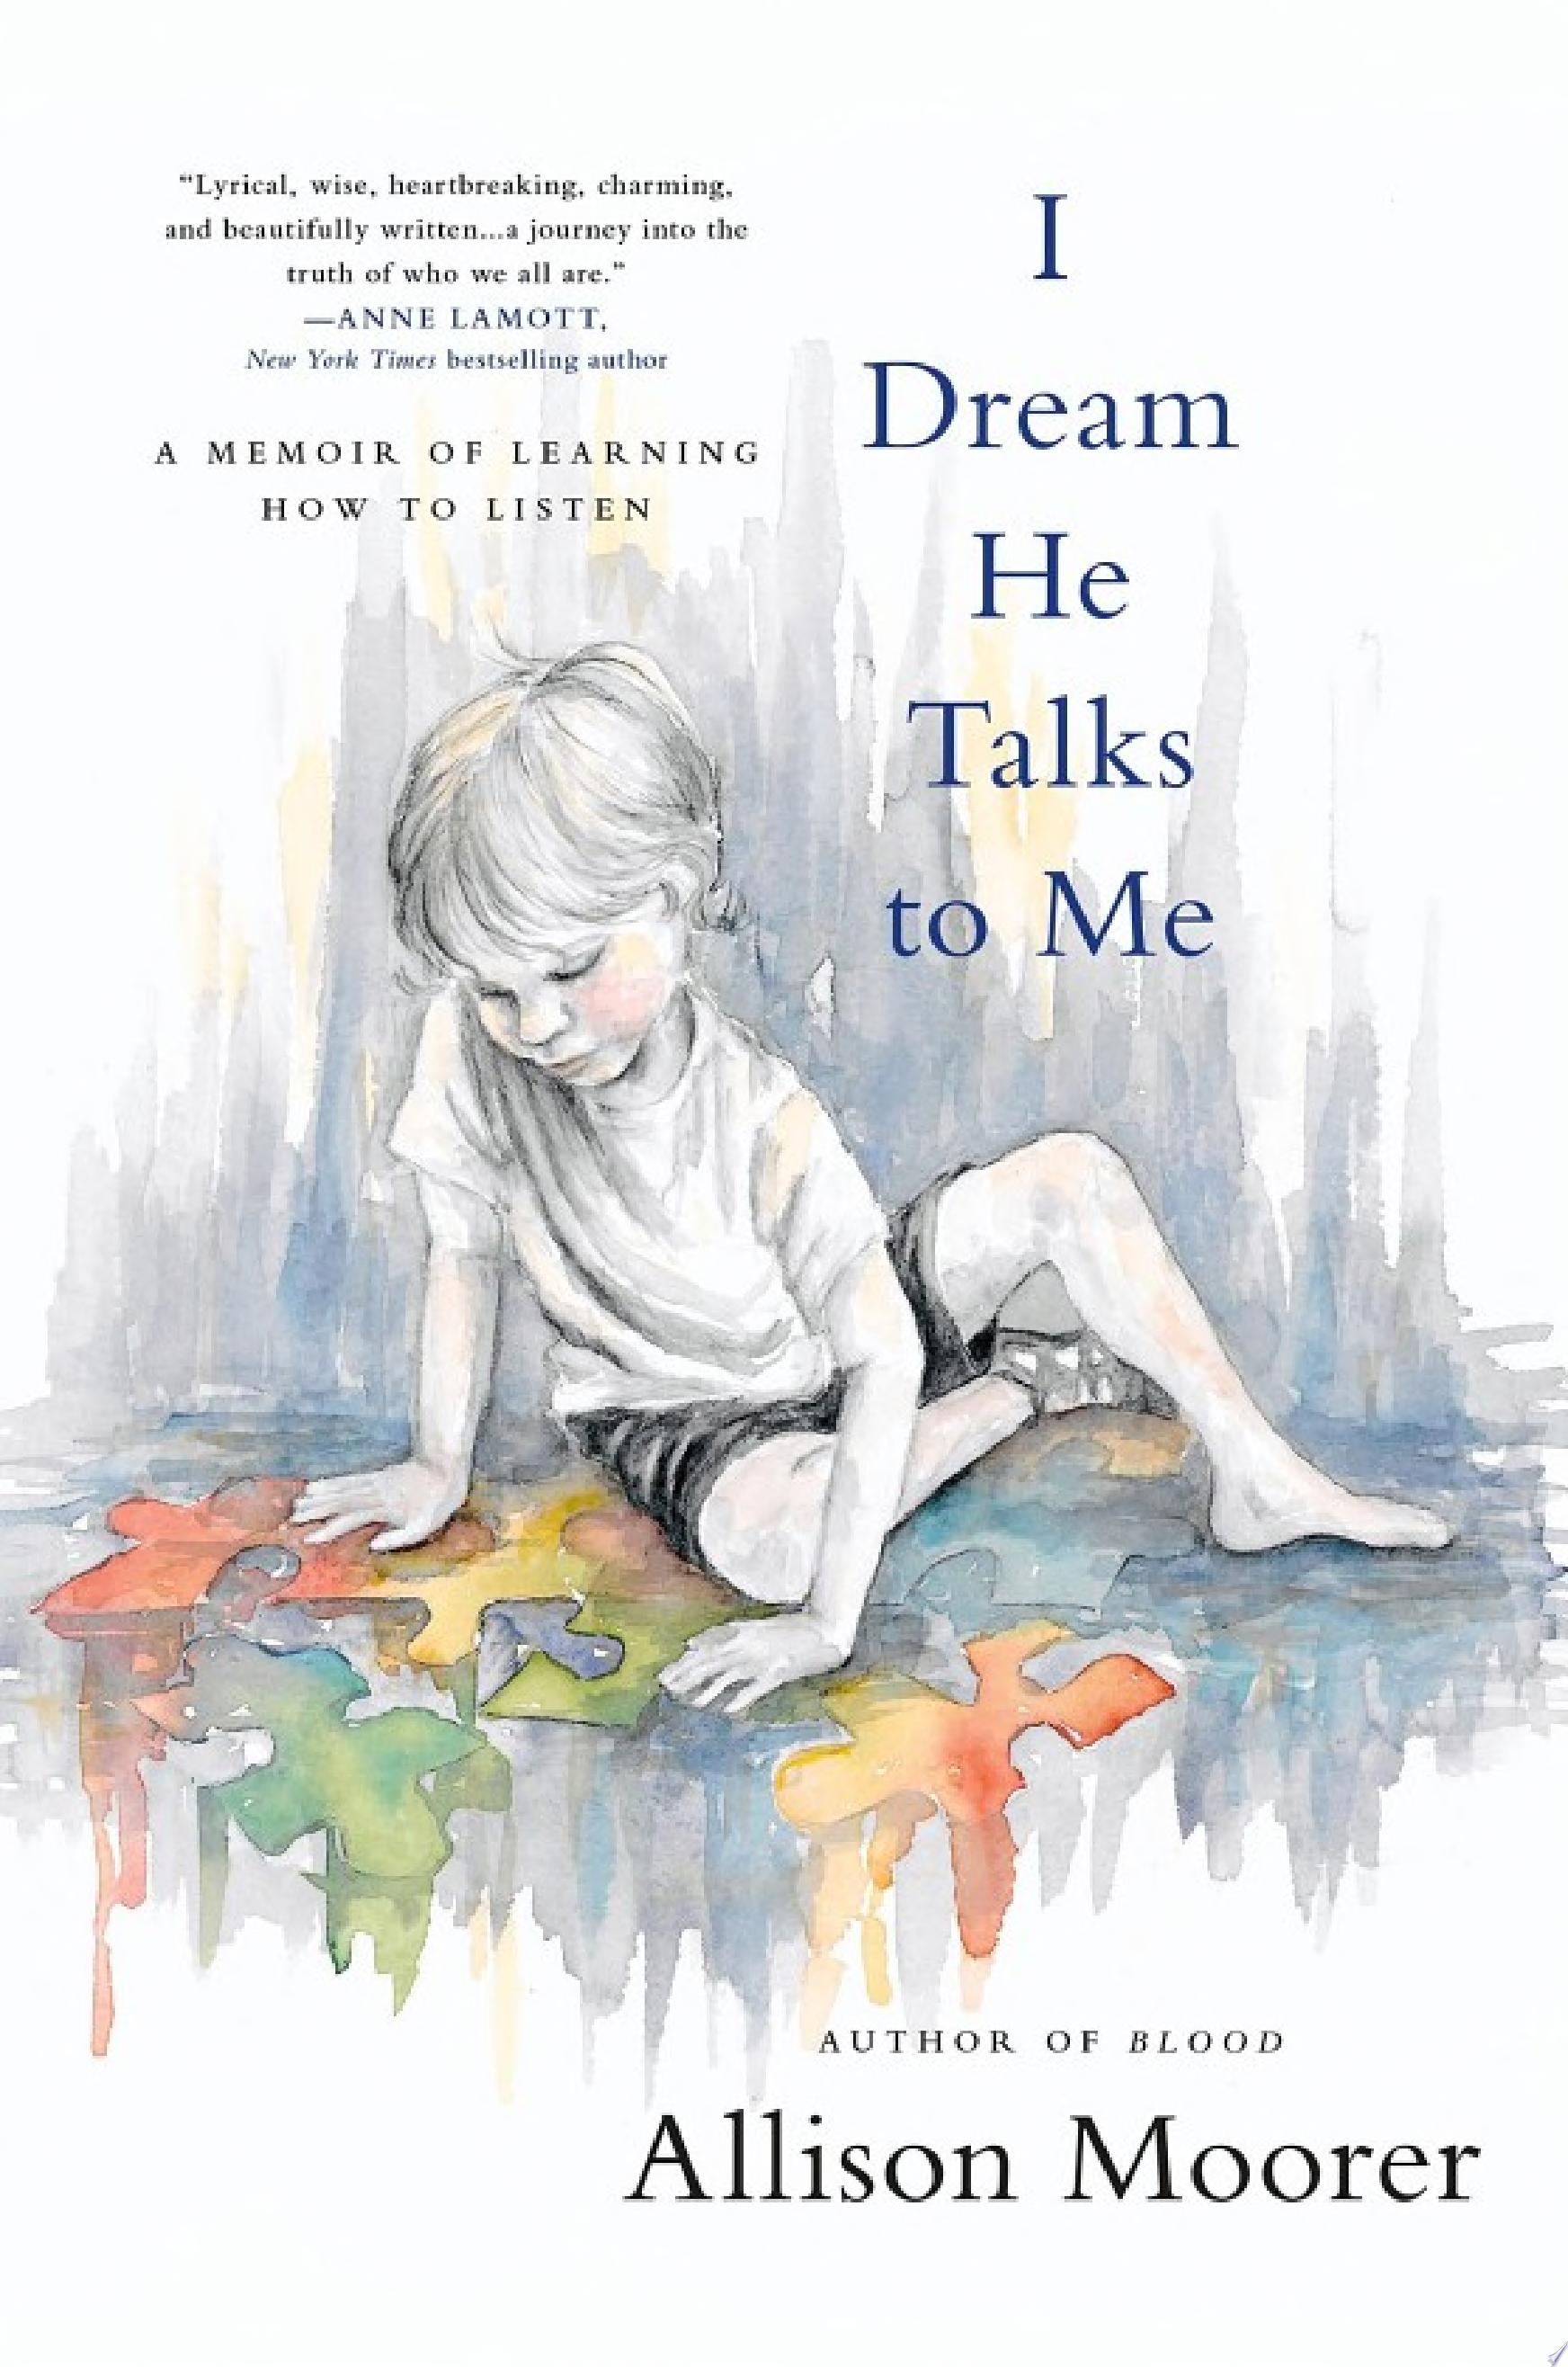 Image for "I Dream He Talks to Me"